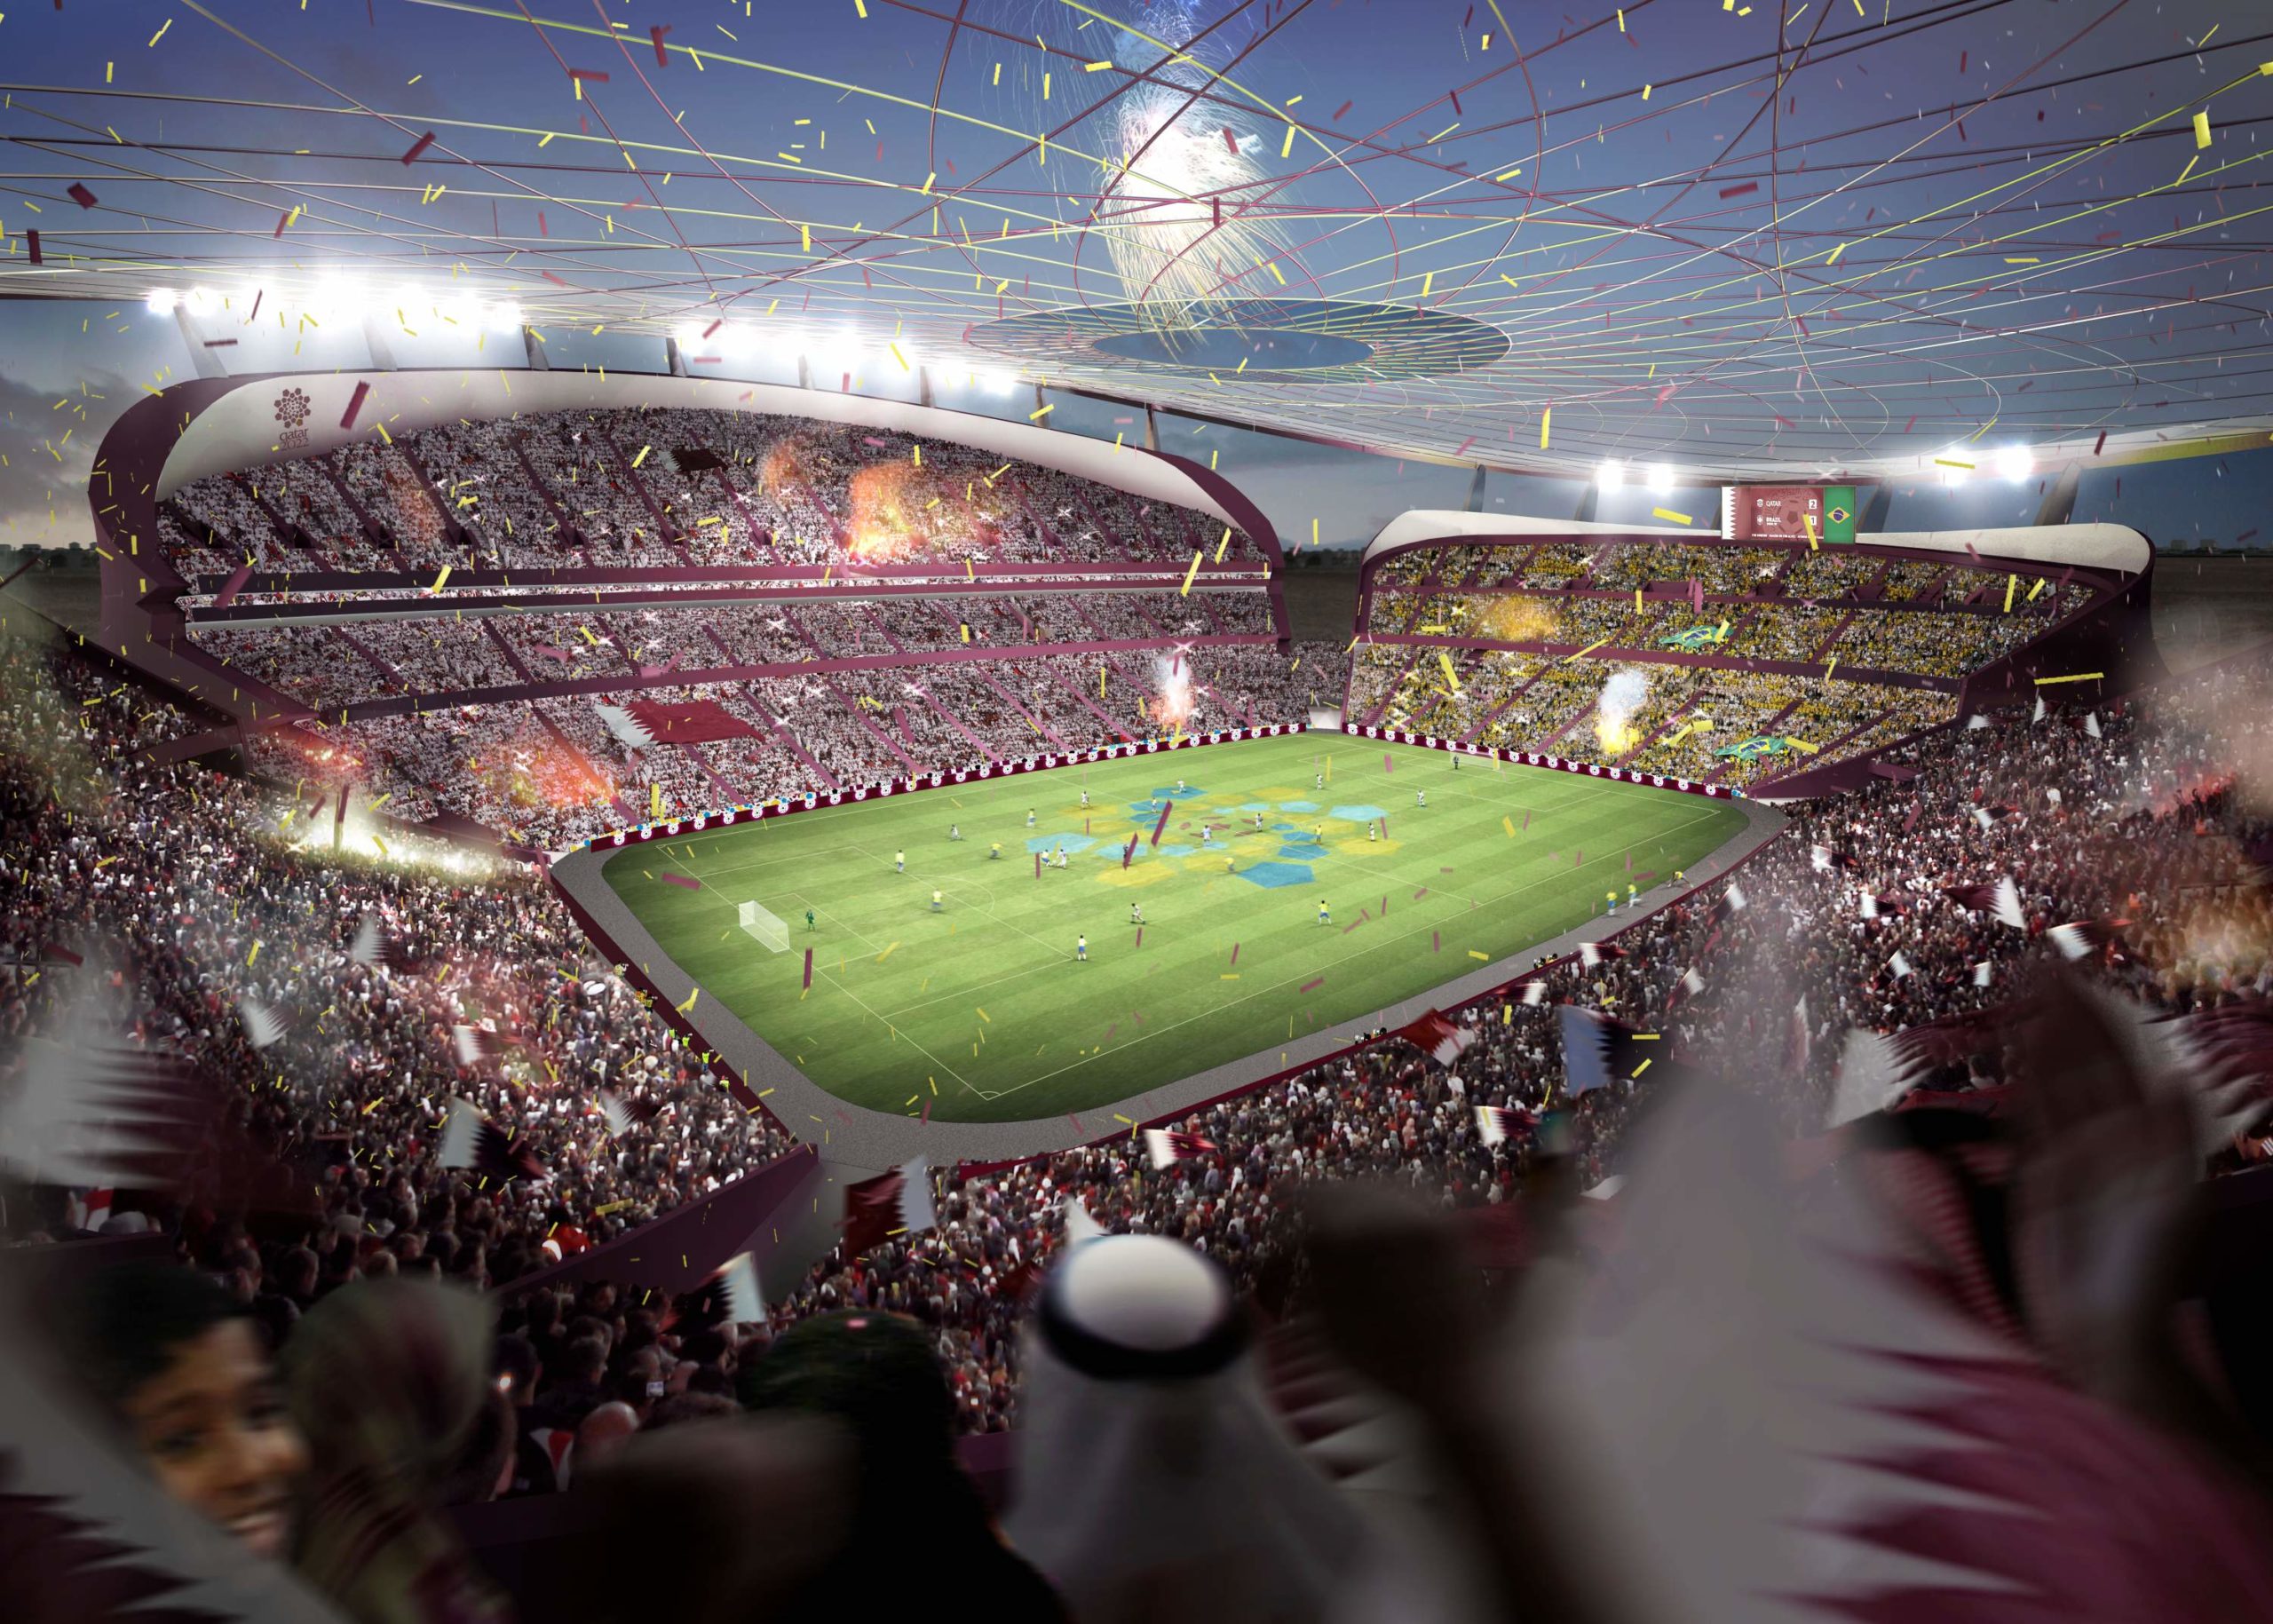 Qatar’s $US45 Billion Plan To Build A Brand New City For The World Cup